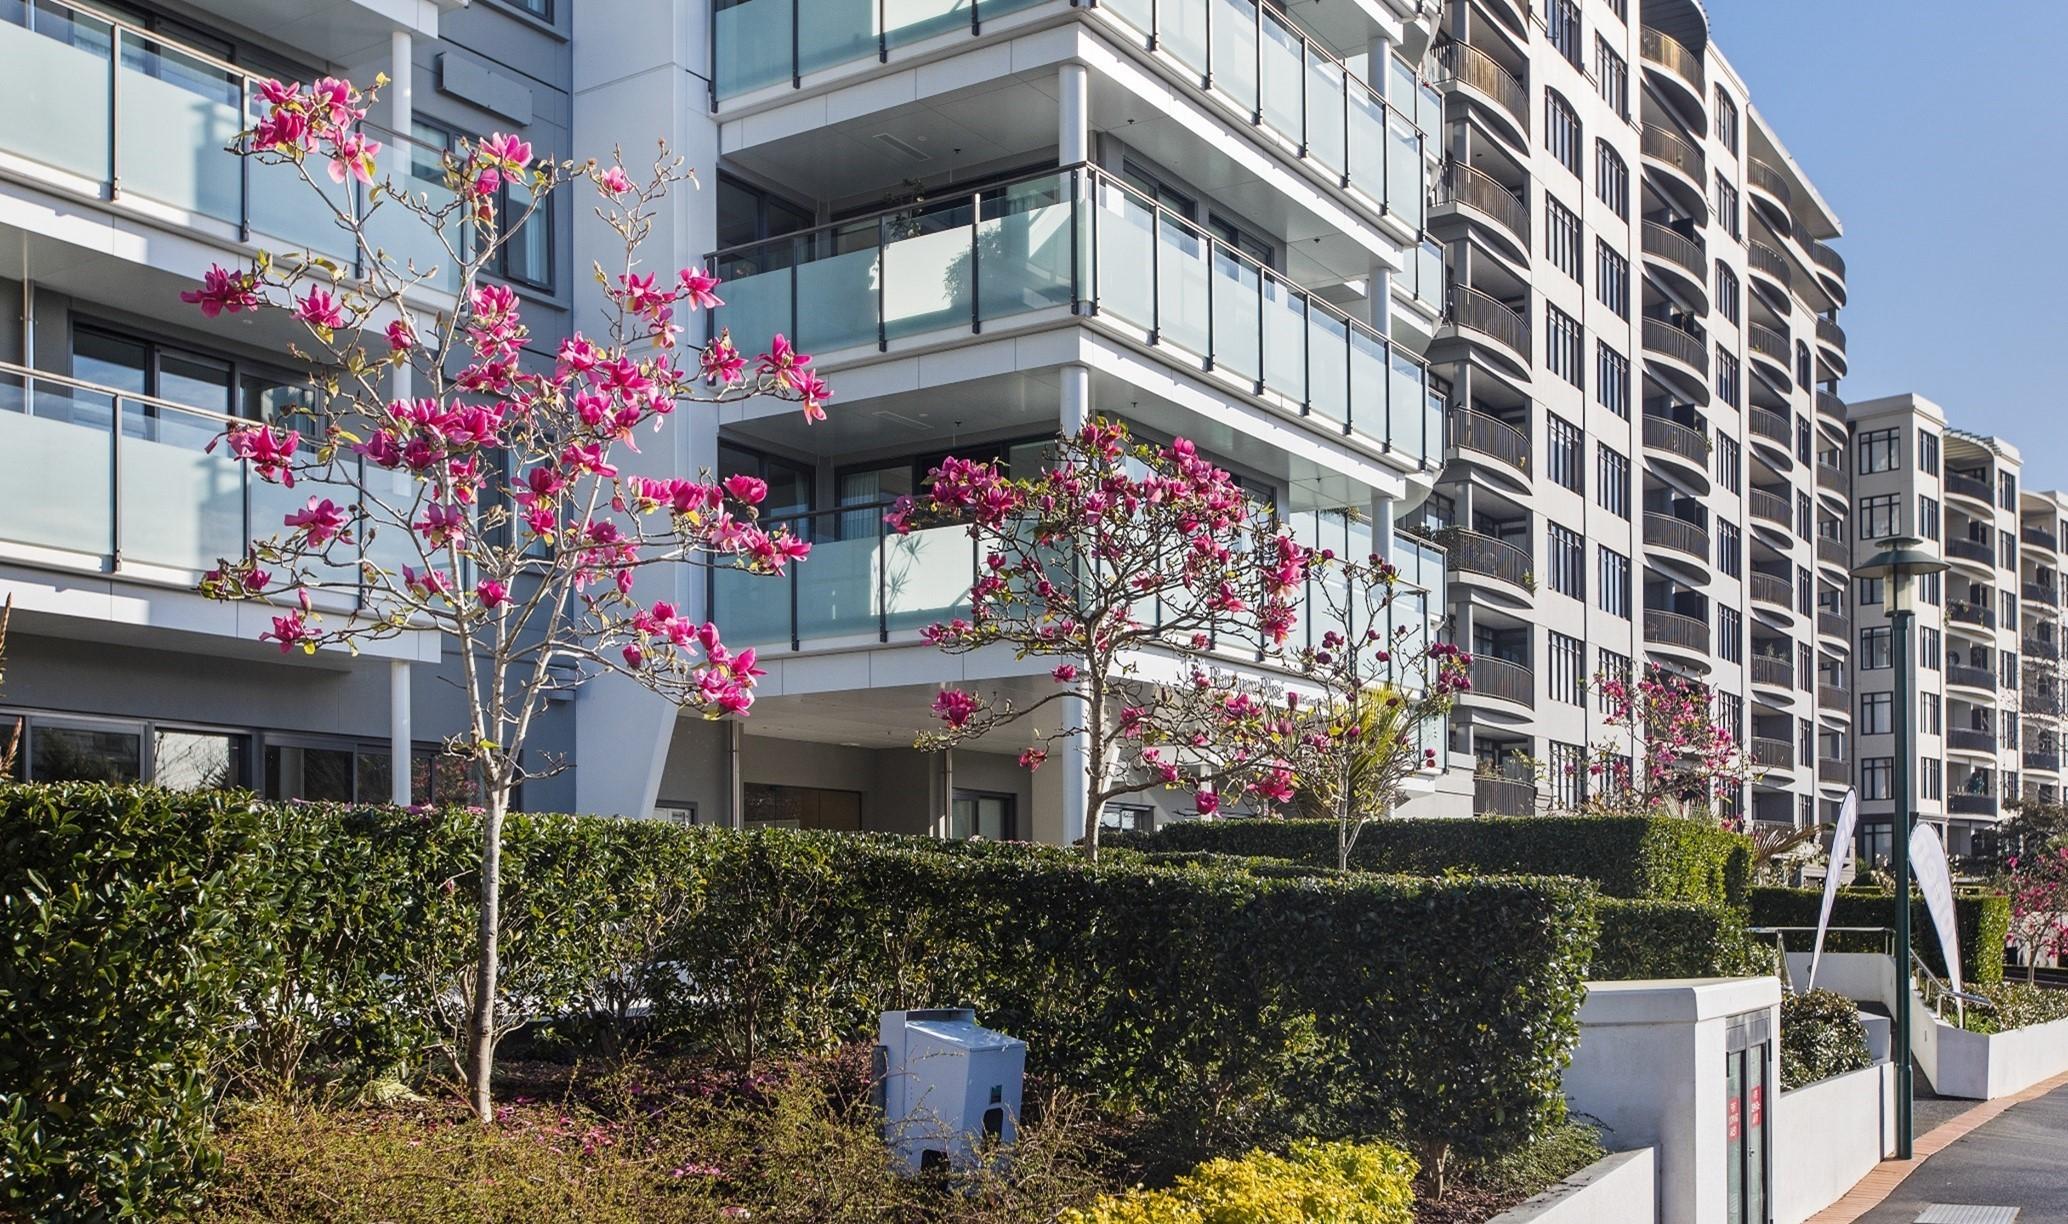 Exterior of Apartments and Magnolia Trees at full bloom